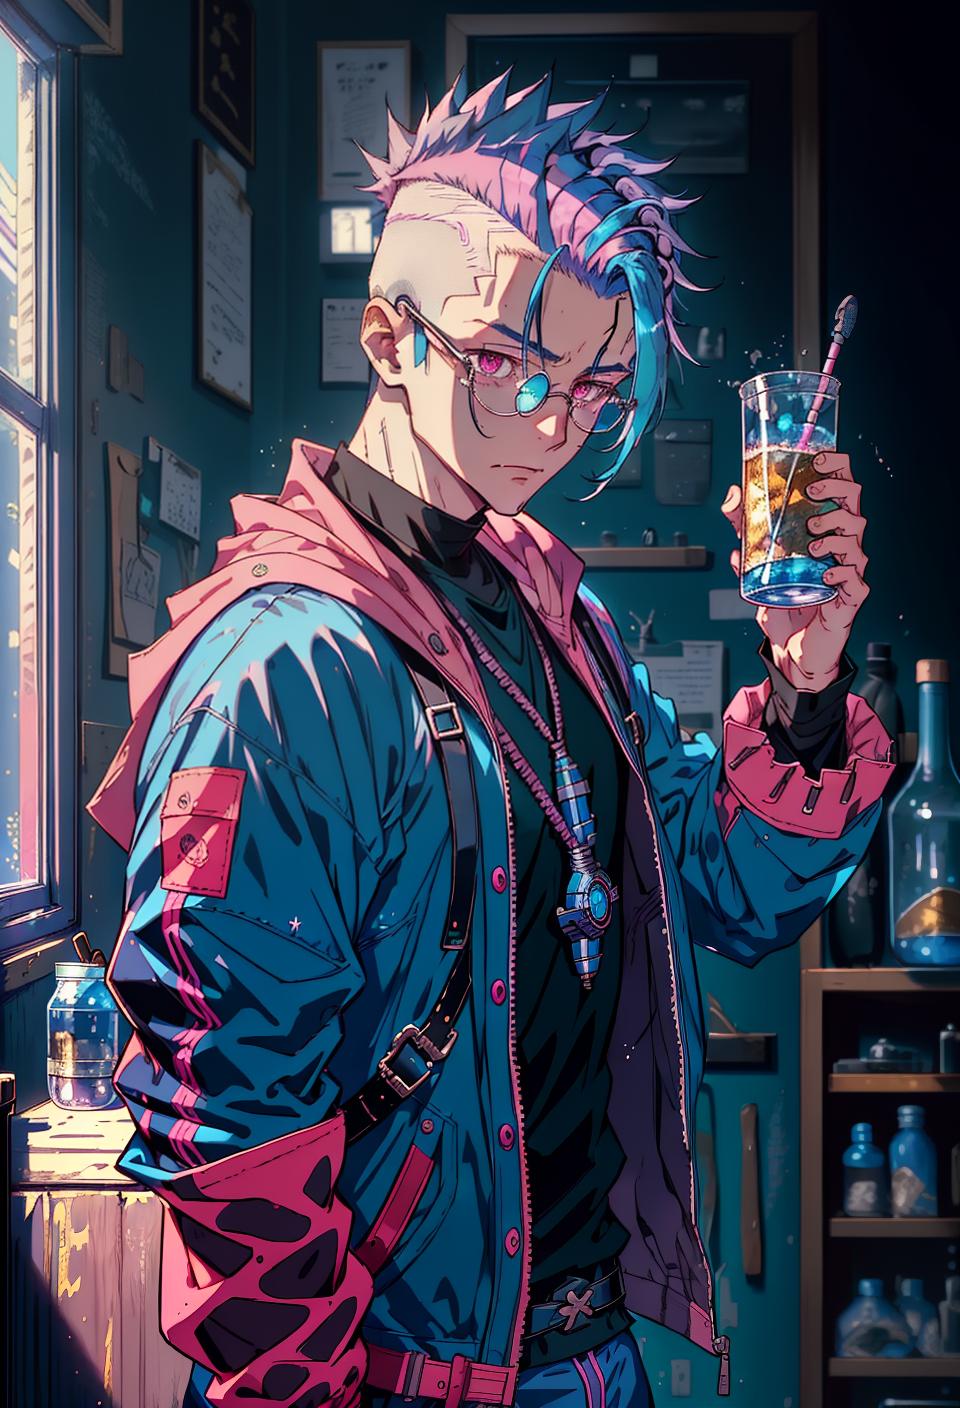  ((trending, highres, masterpiece, cinematic shot)), 1boy, mature, male hiking gear, alchemist laboratory scene, long messy blue hair, mohawk hairstyle, large pink eyes, high class, elegant personality, sad expression, animal ears, animal tail, fair skin, magical, observant